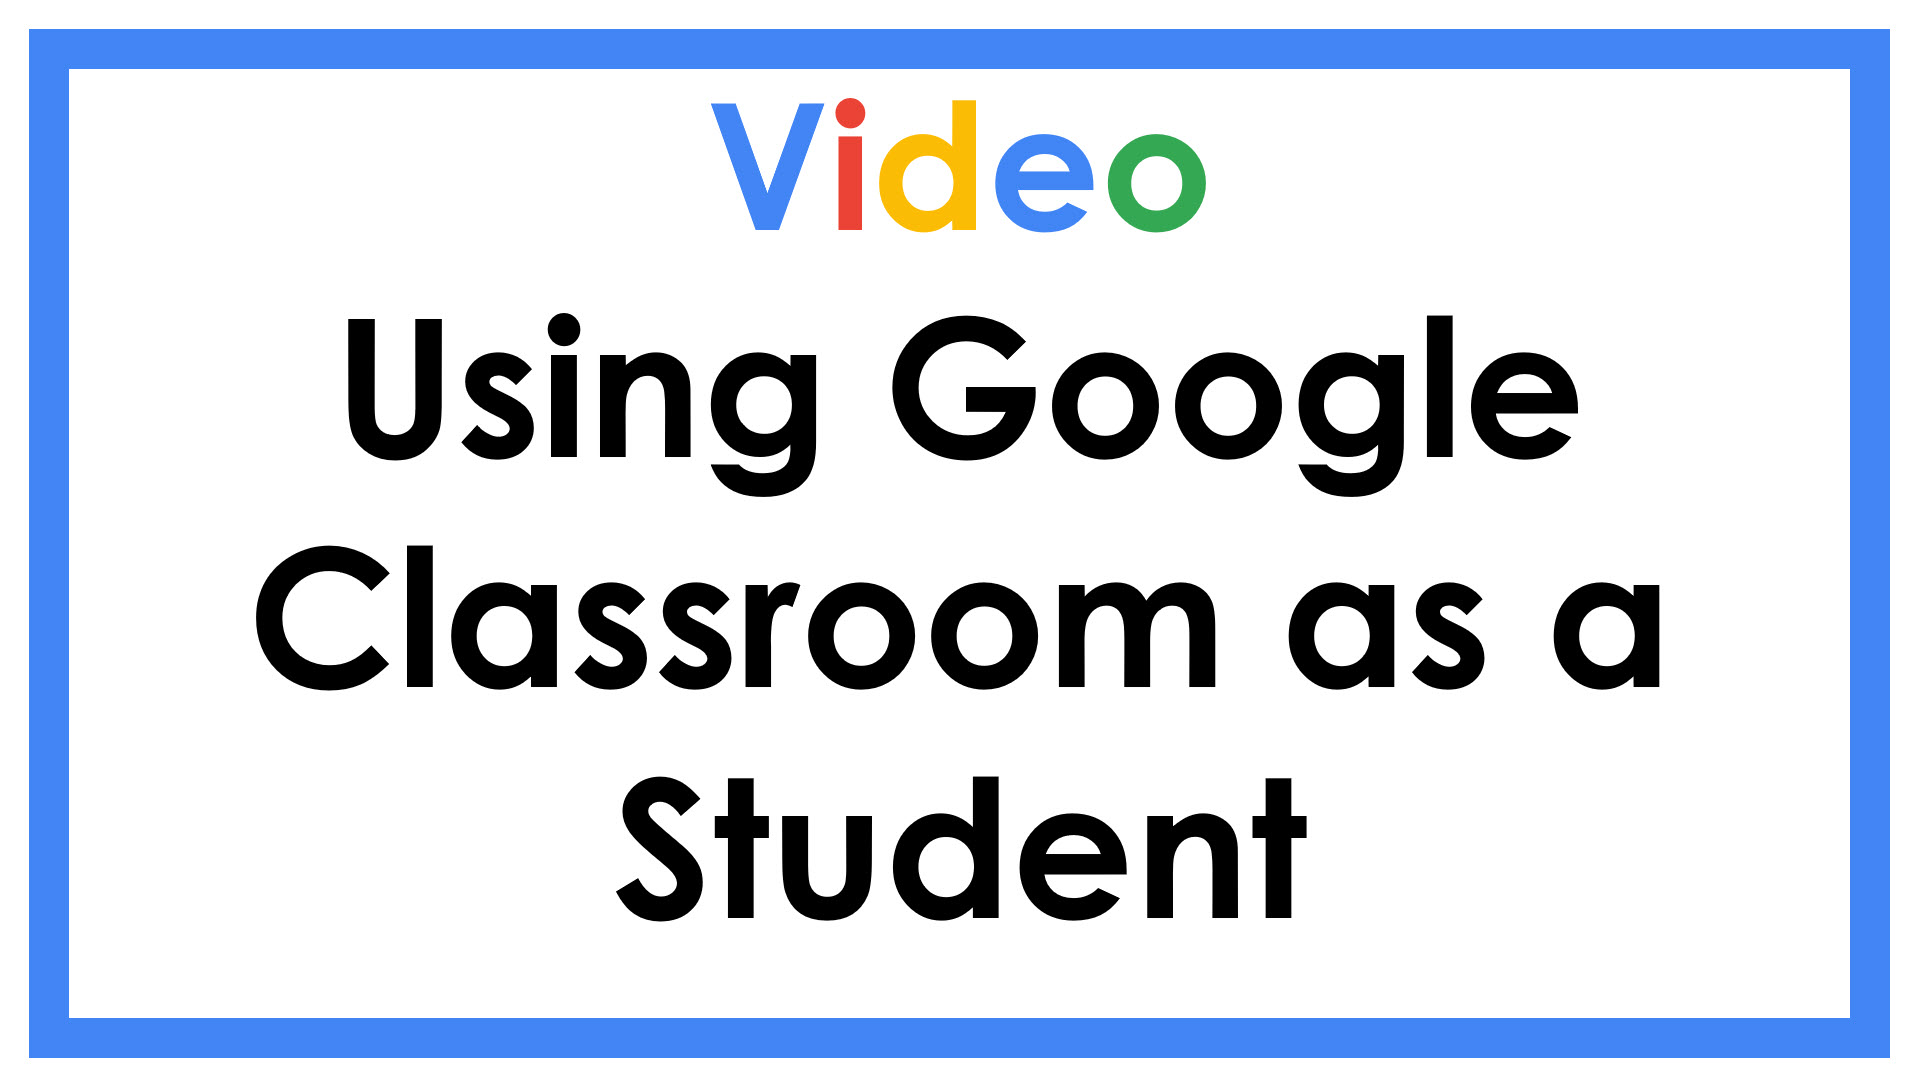 Video Using Google Classroom as a Student